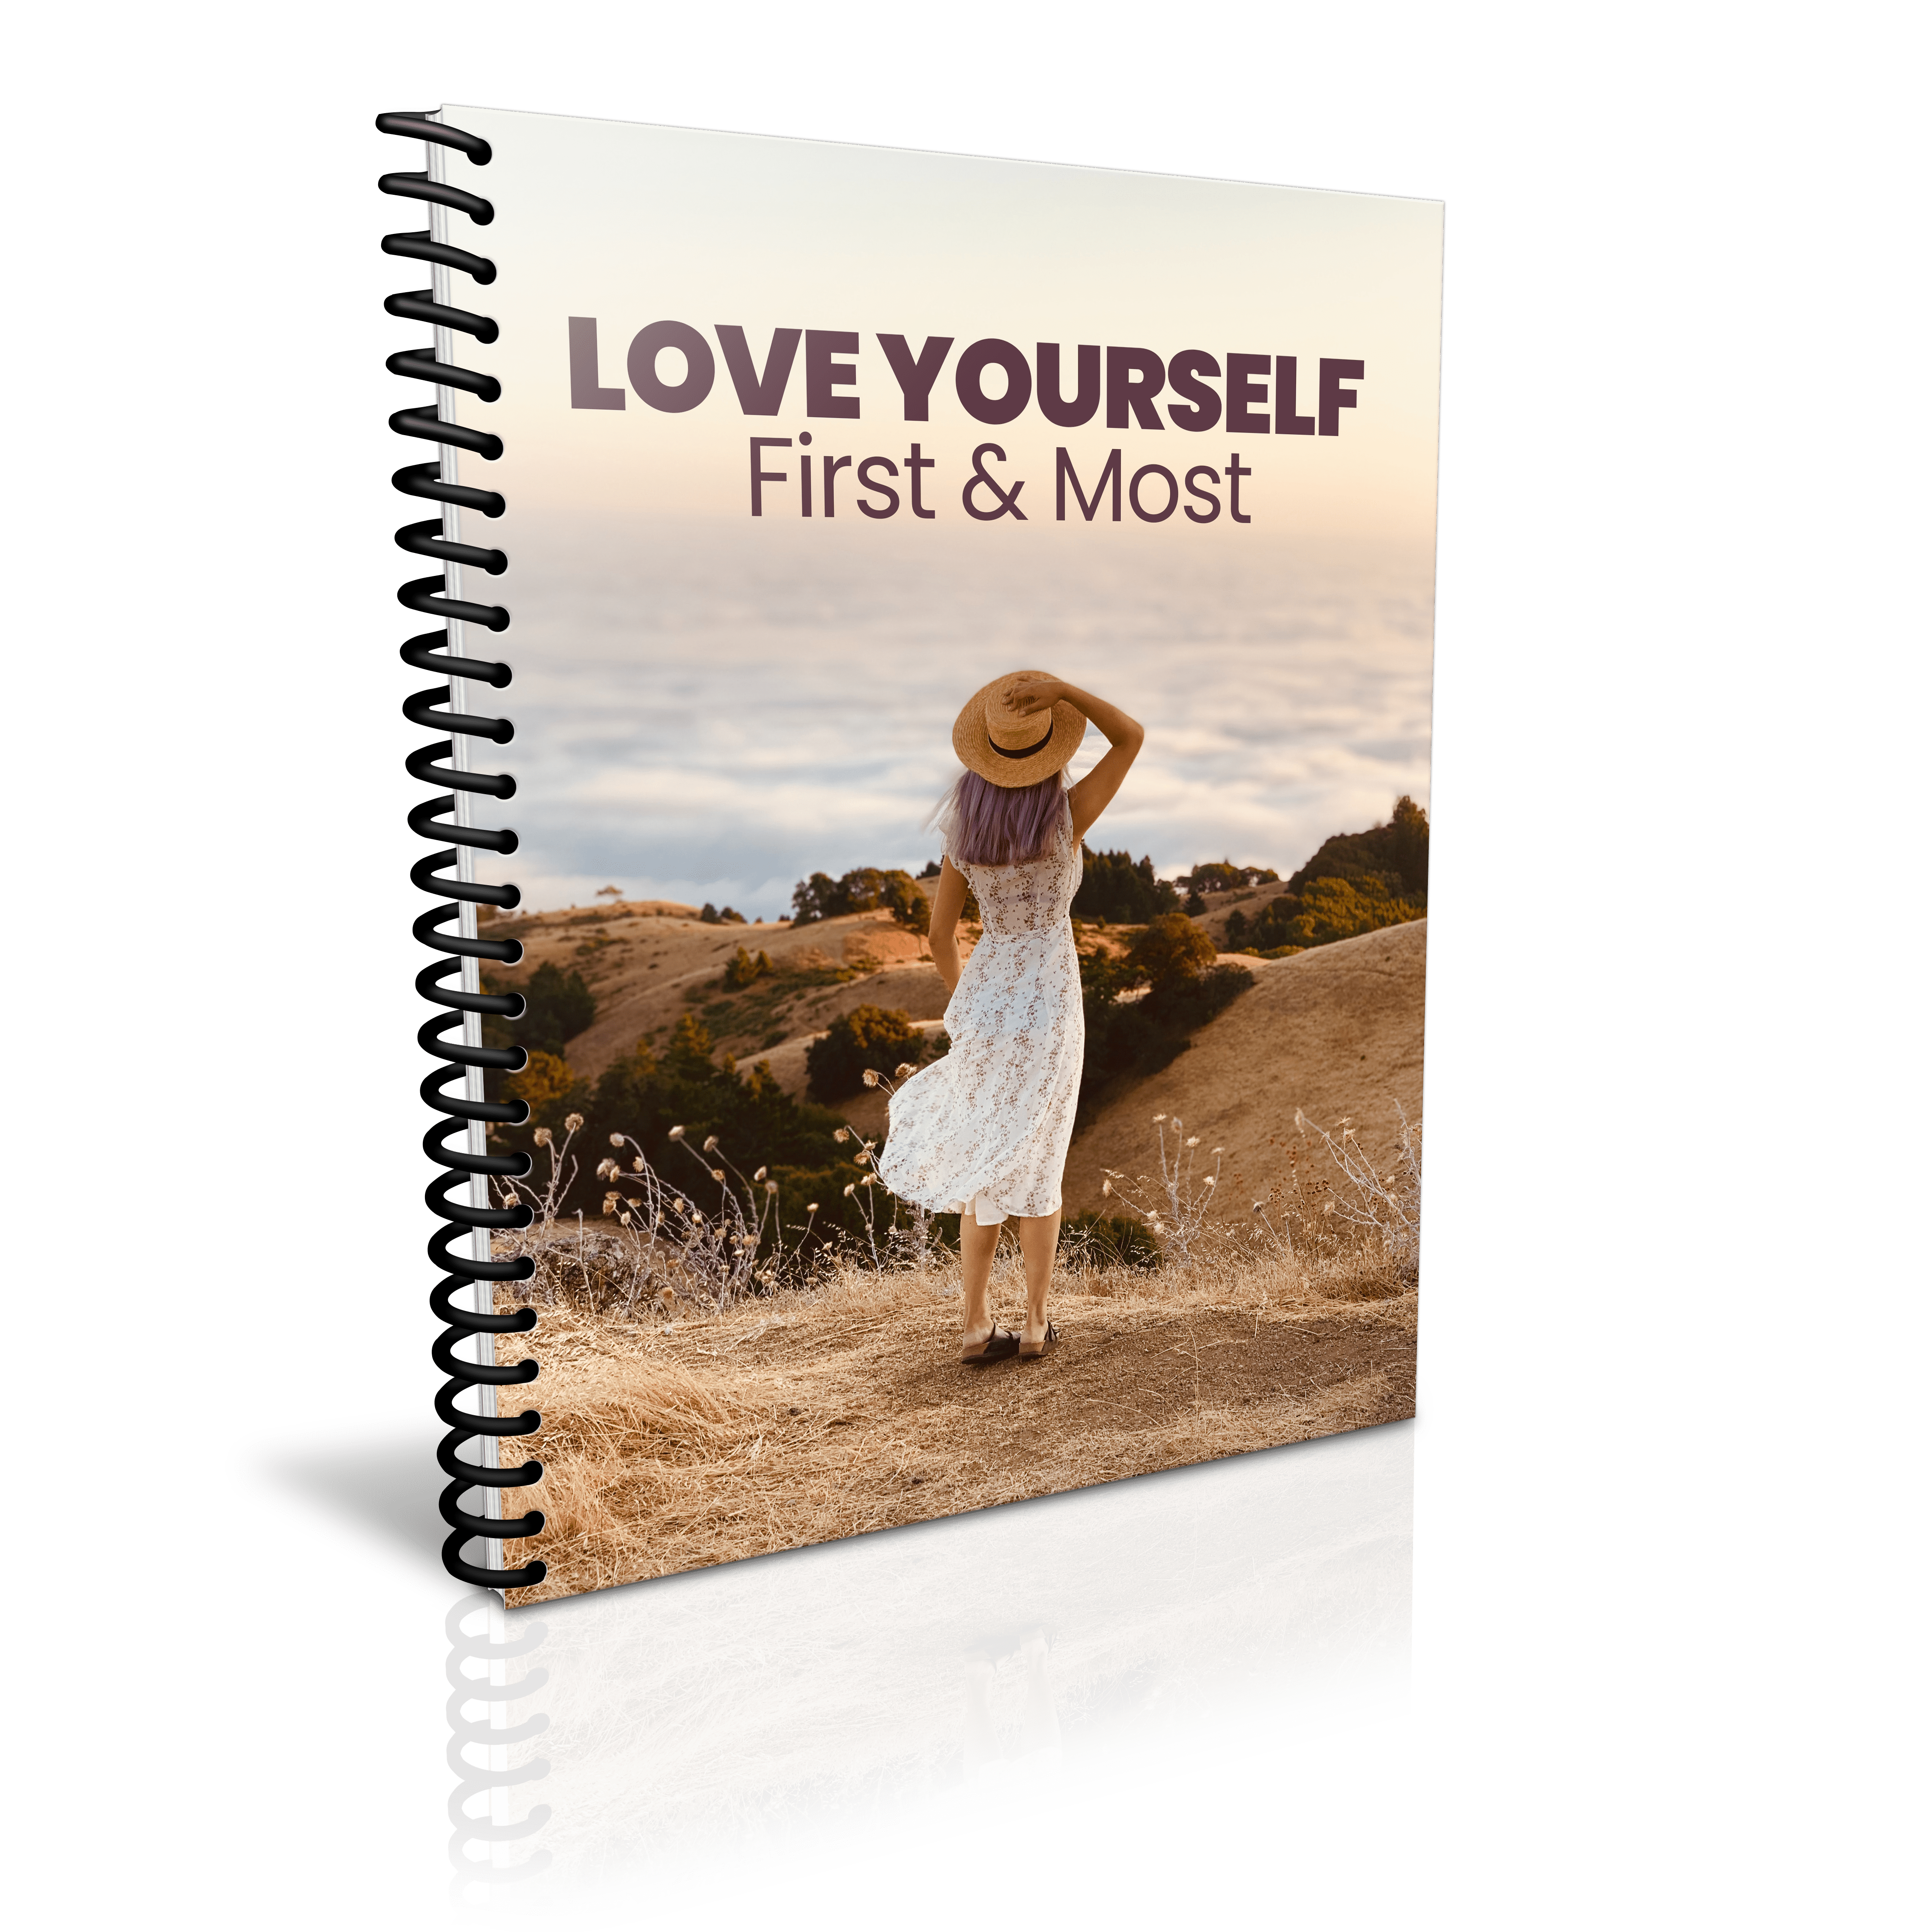 Love Yourself Workbook, It's the gateway to finding the courage to be seen